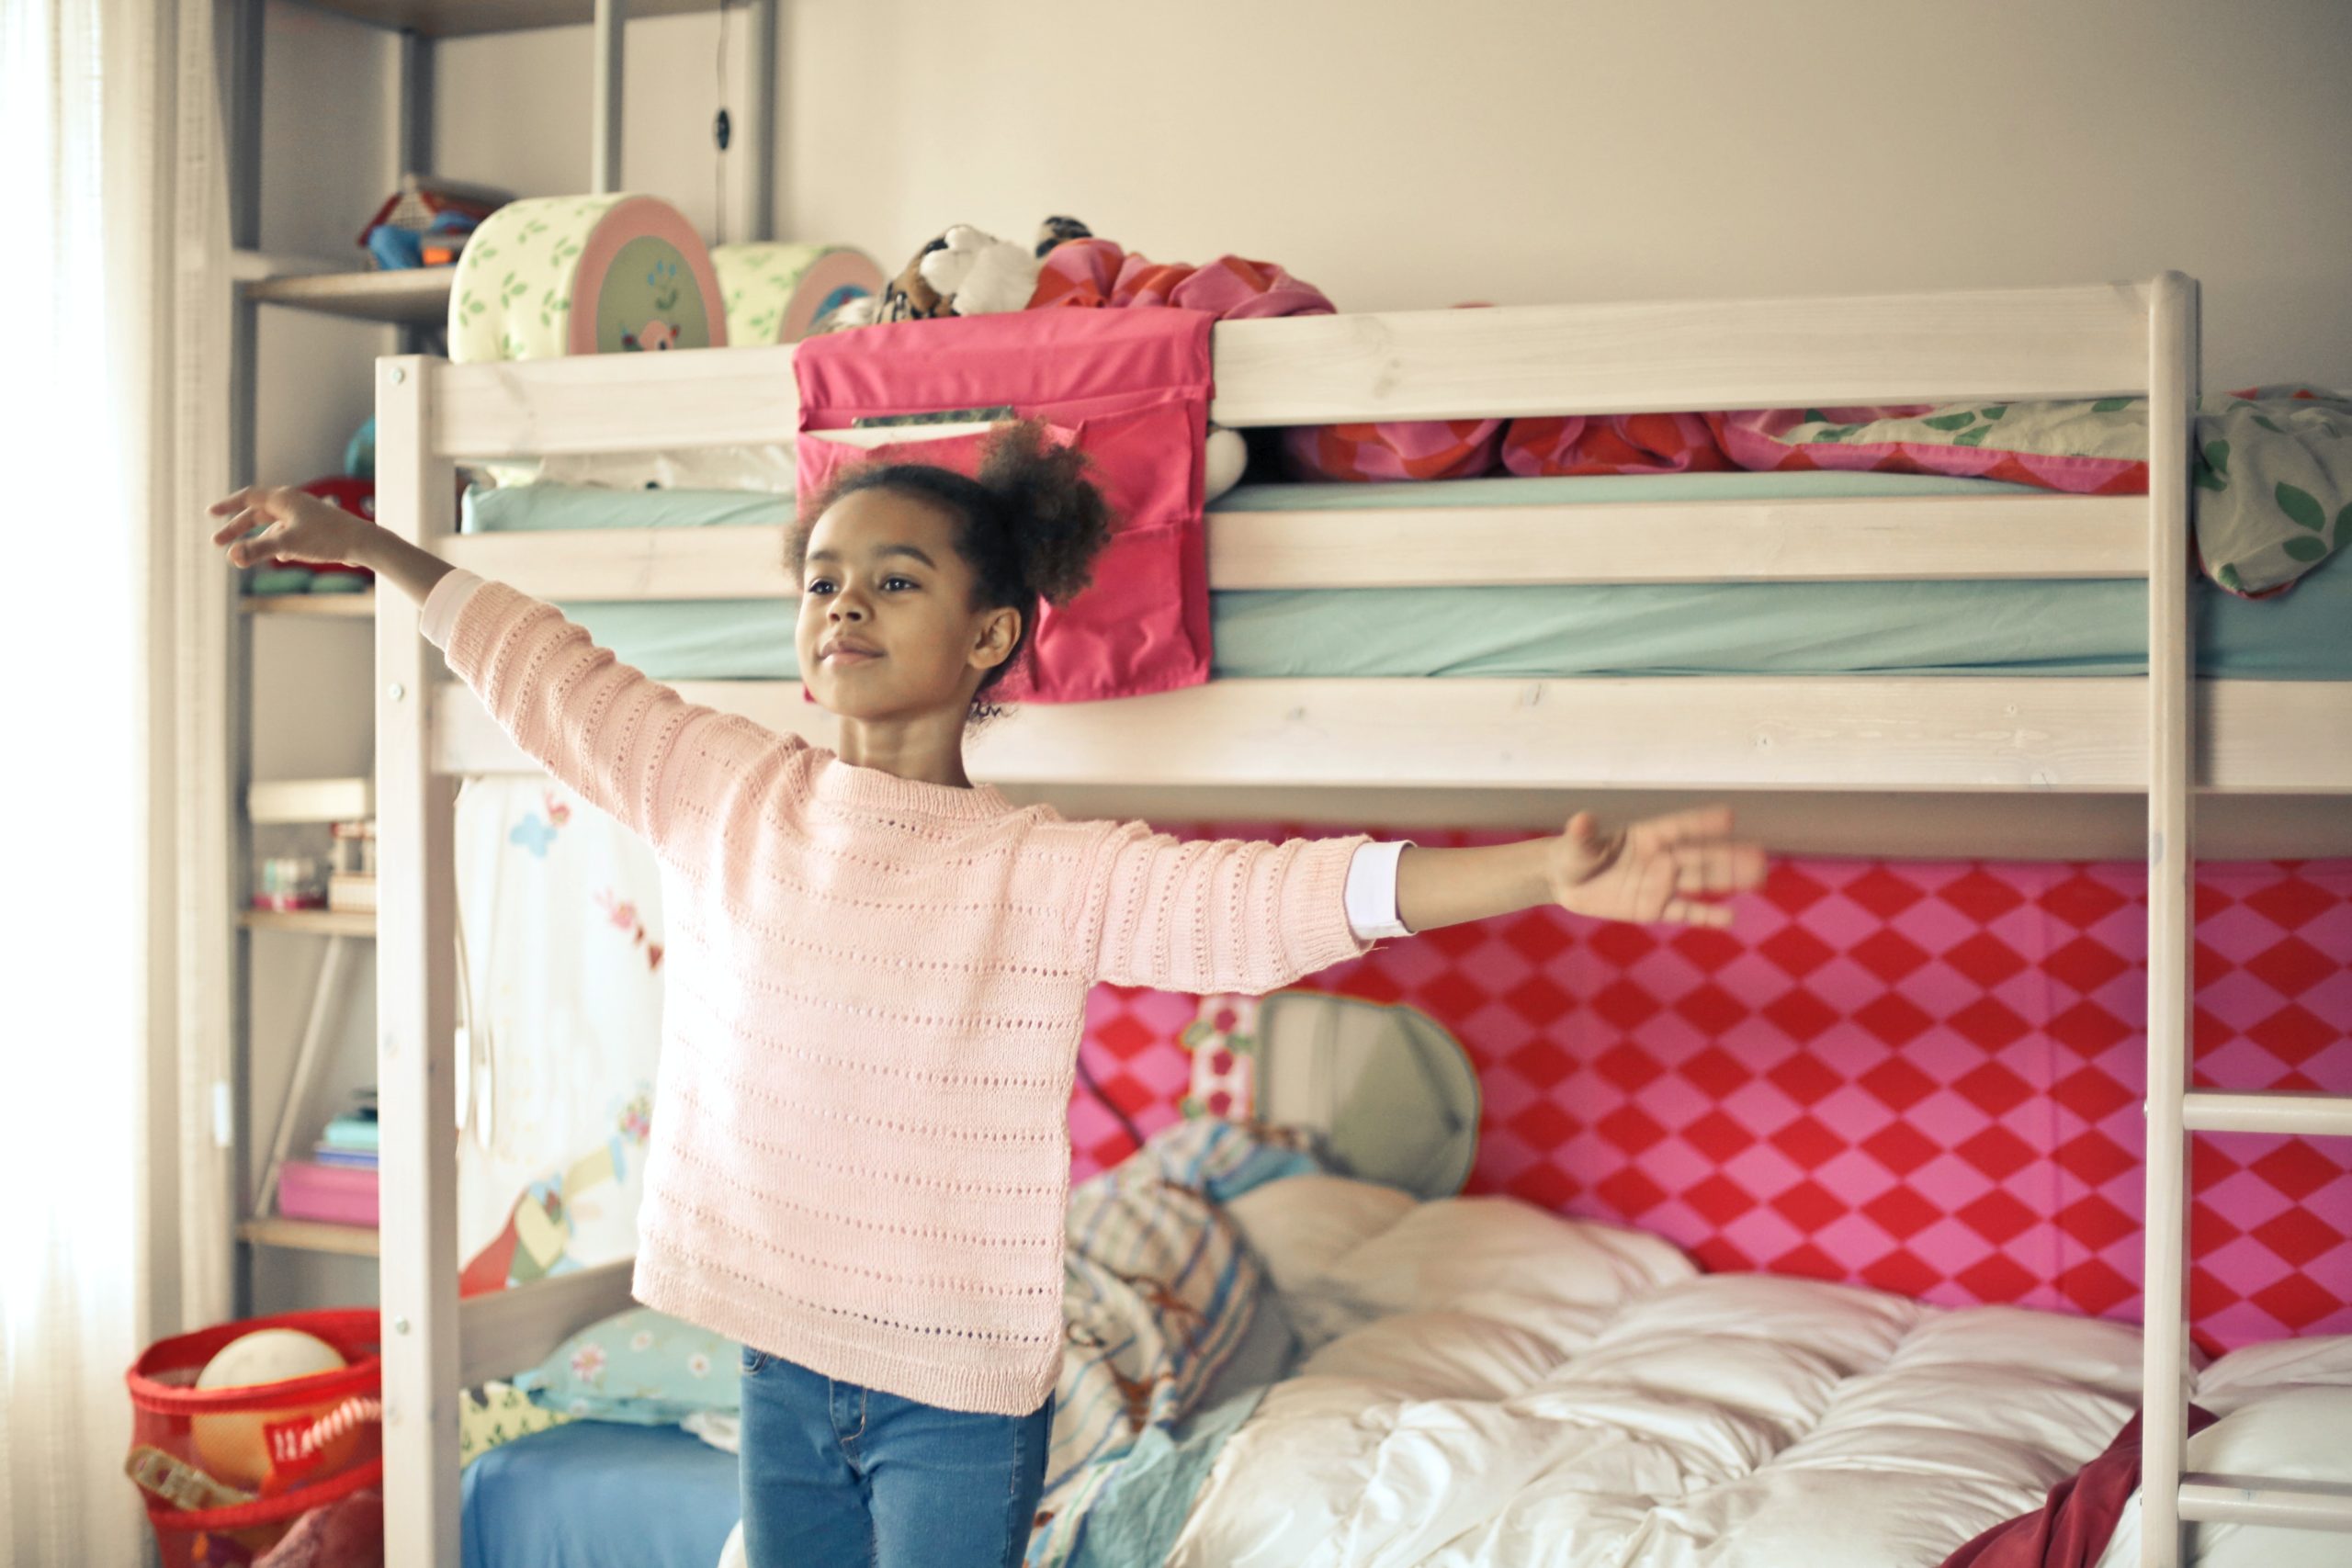 A girl standing in front of a bunk bed, with her hands in the air.